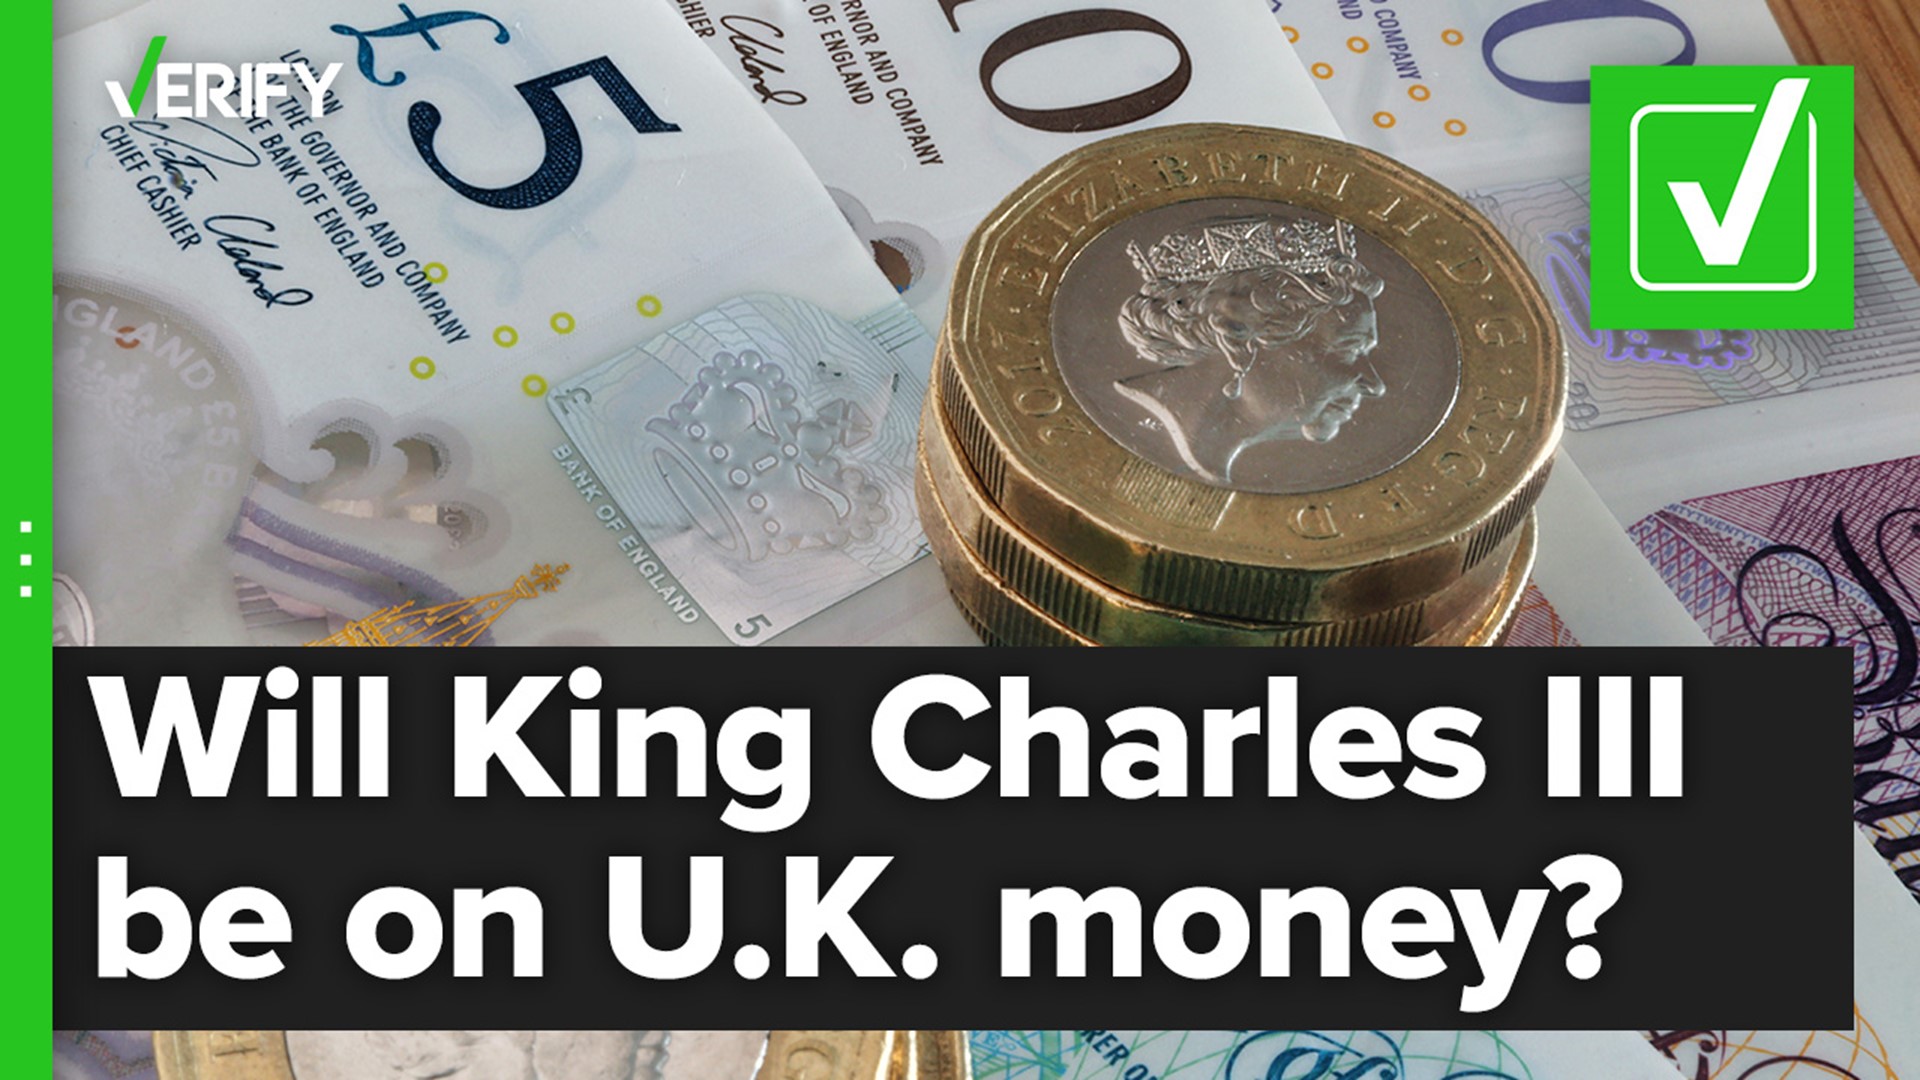 Many new coins and bills in the UK will now have King Charles III’s face on them. Money featuring Queen Elizabeth II’s face will remain valid.